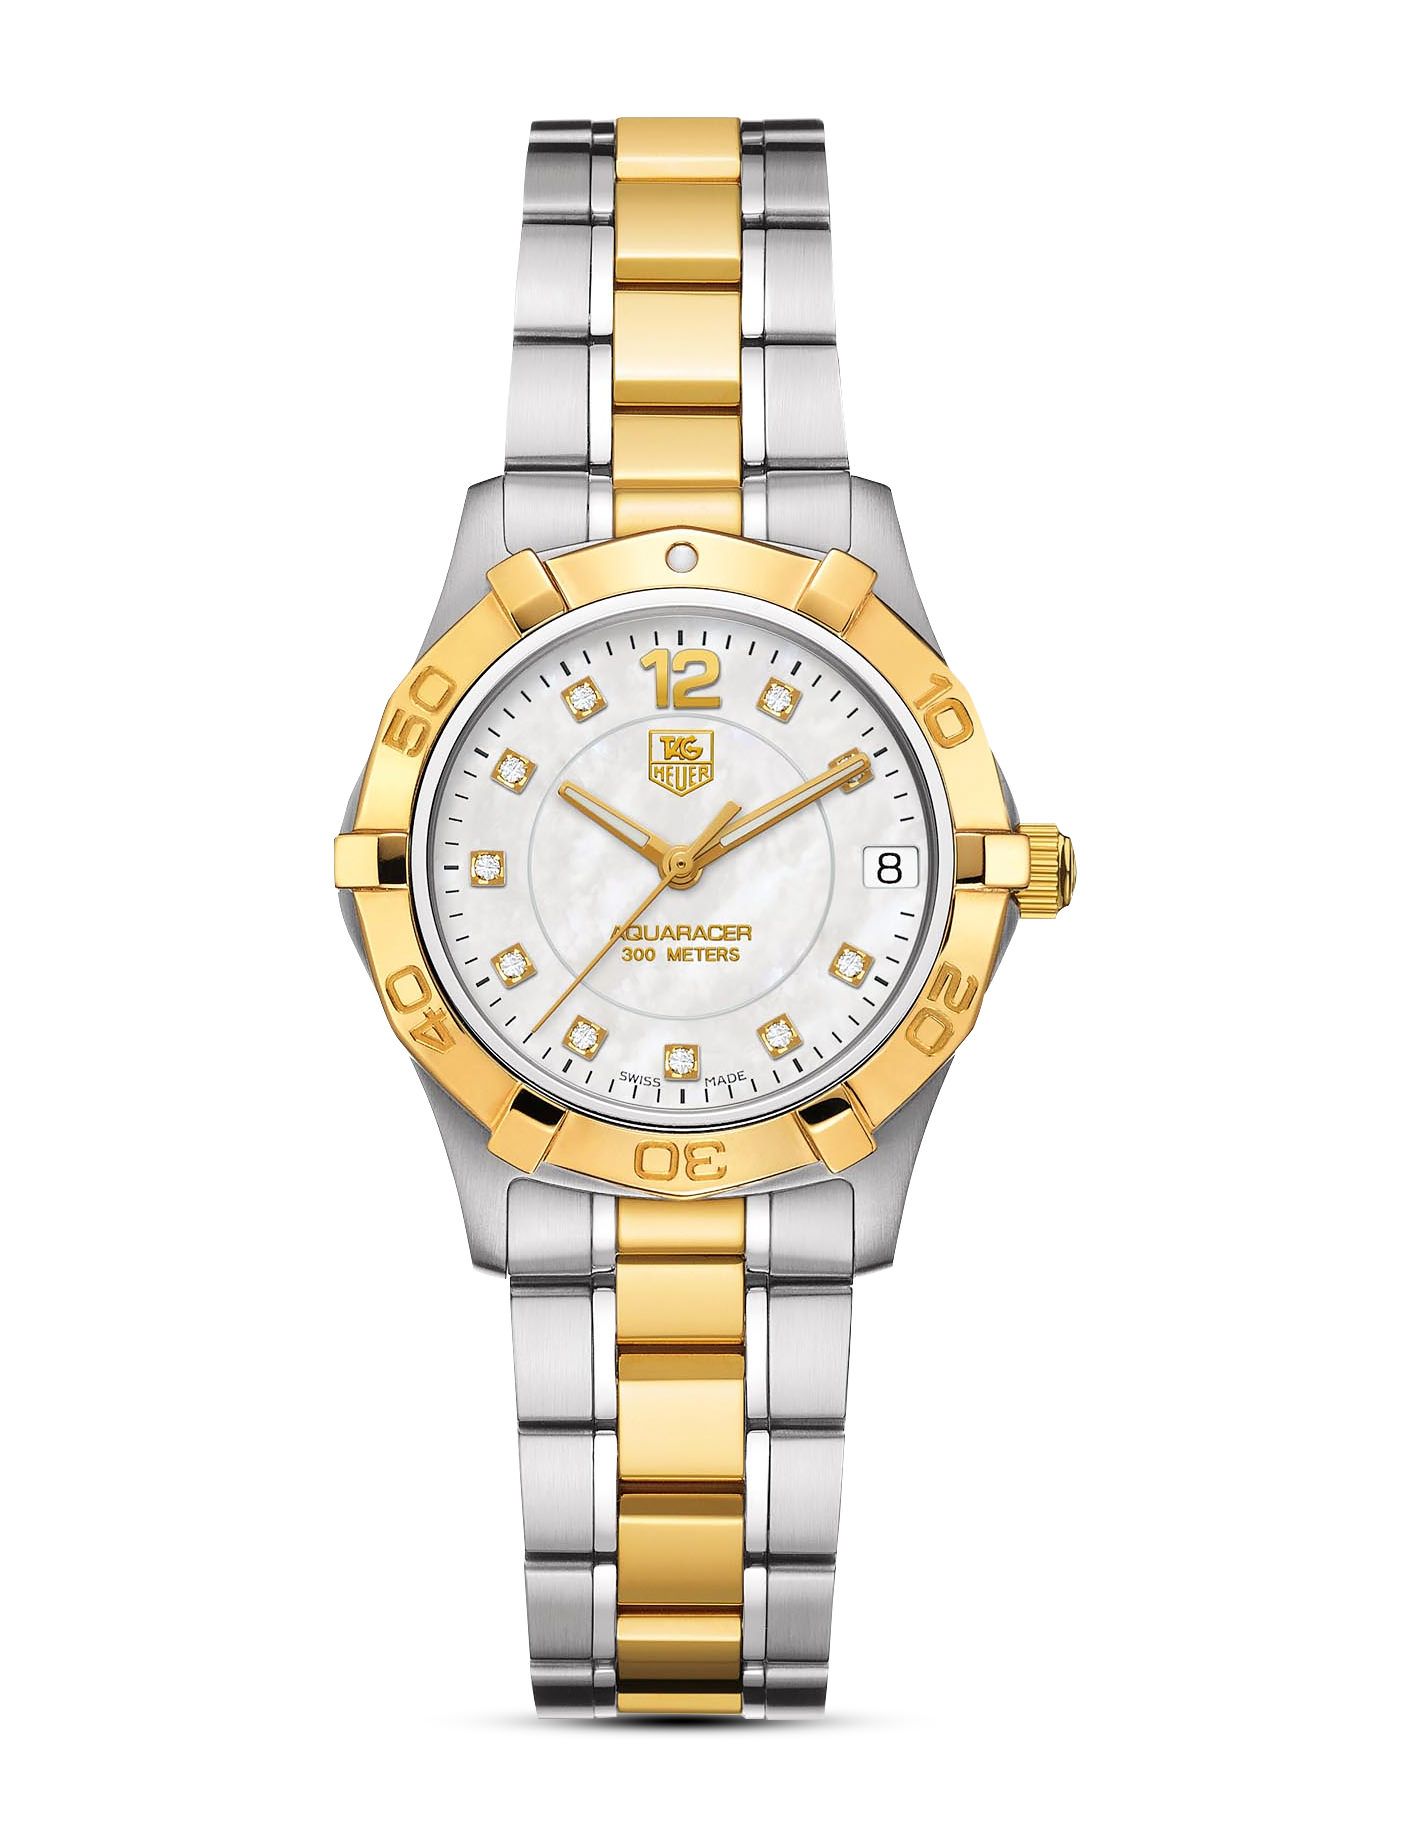 Provident Jewelry - How cool is the mother of pearl dial on this